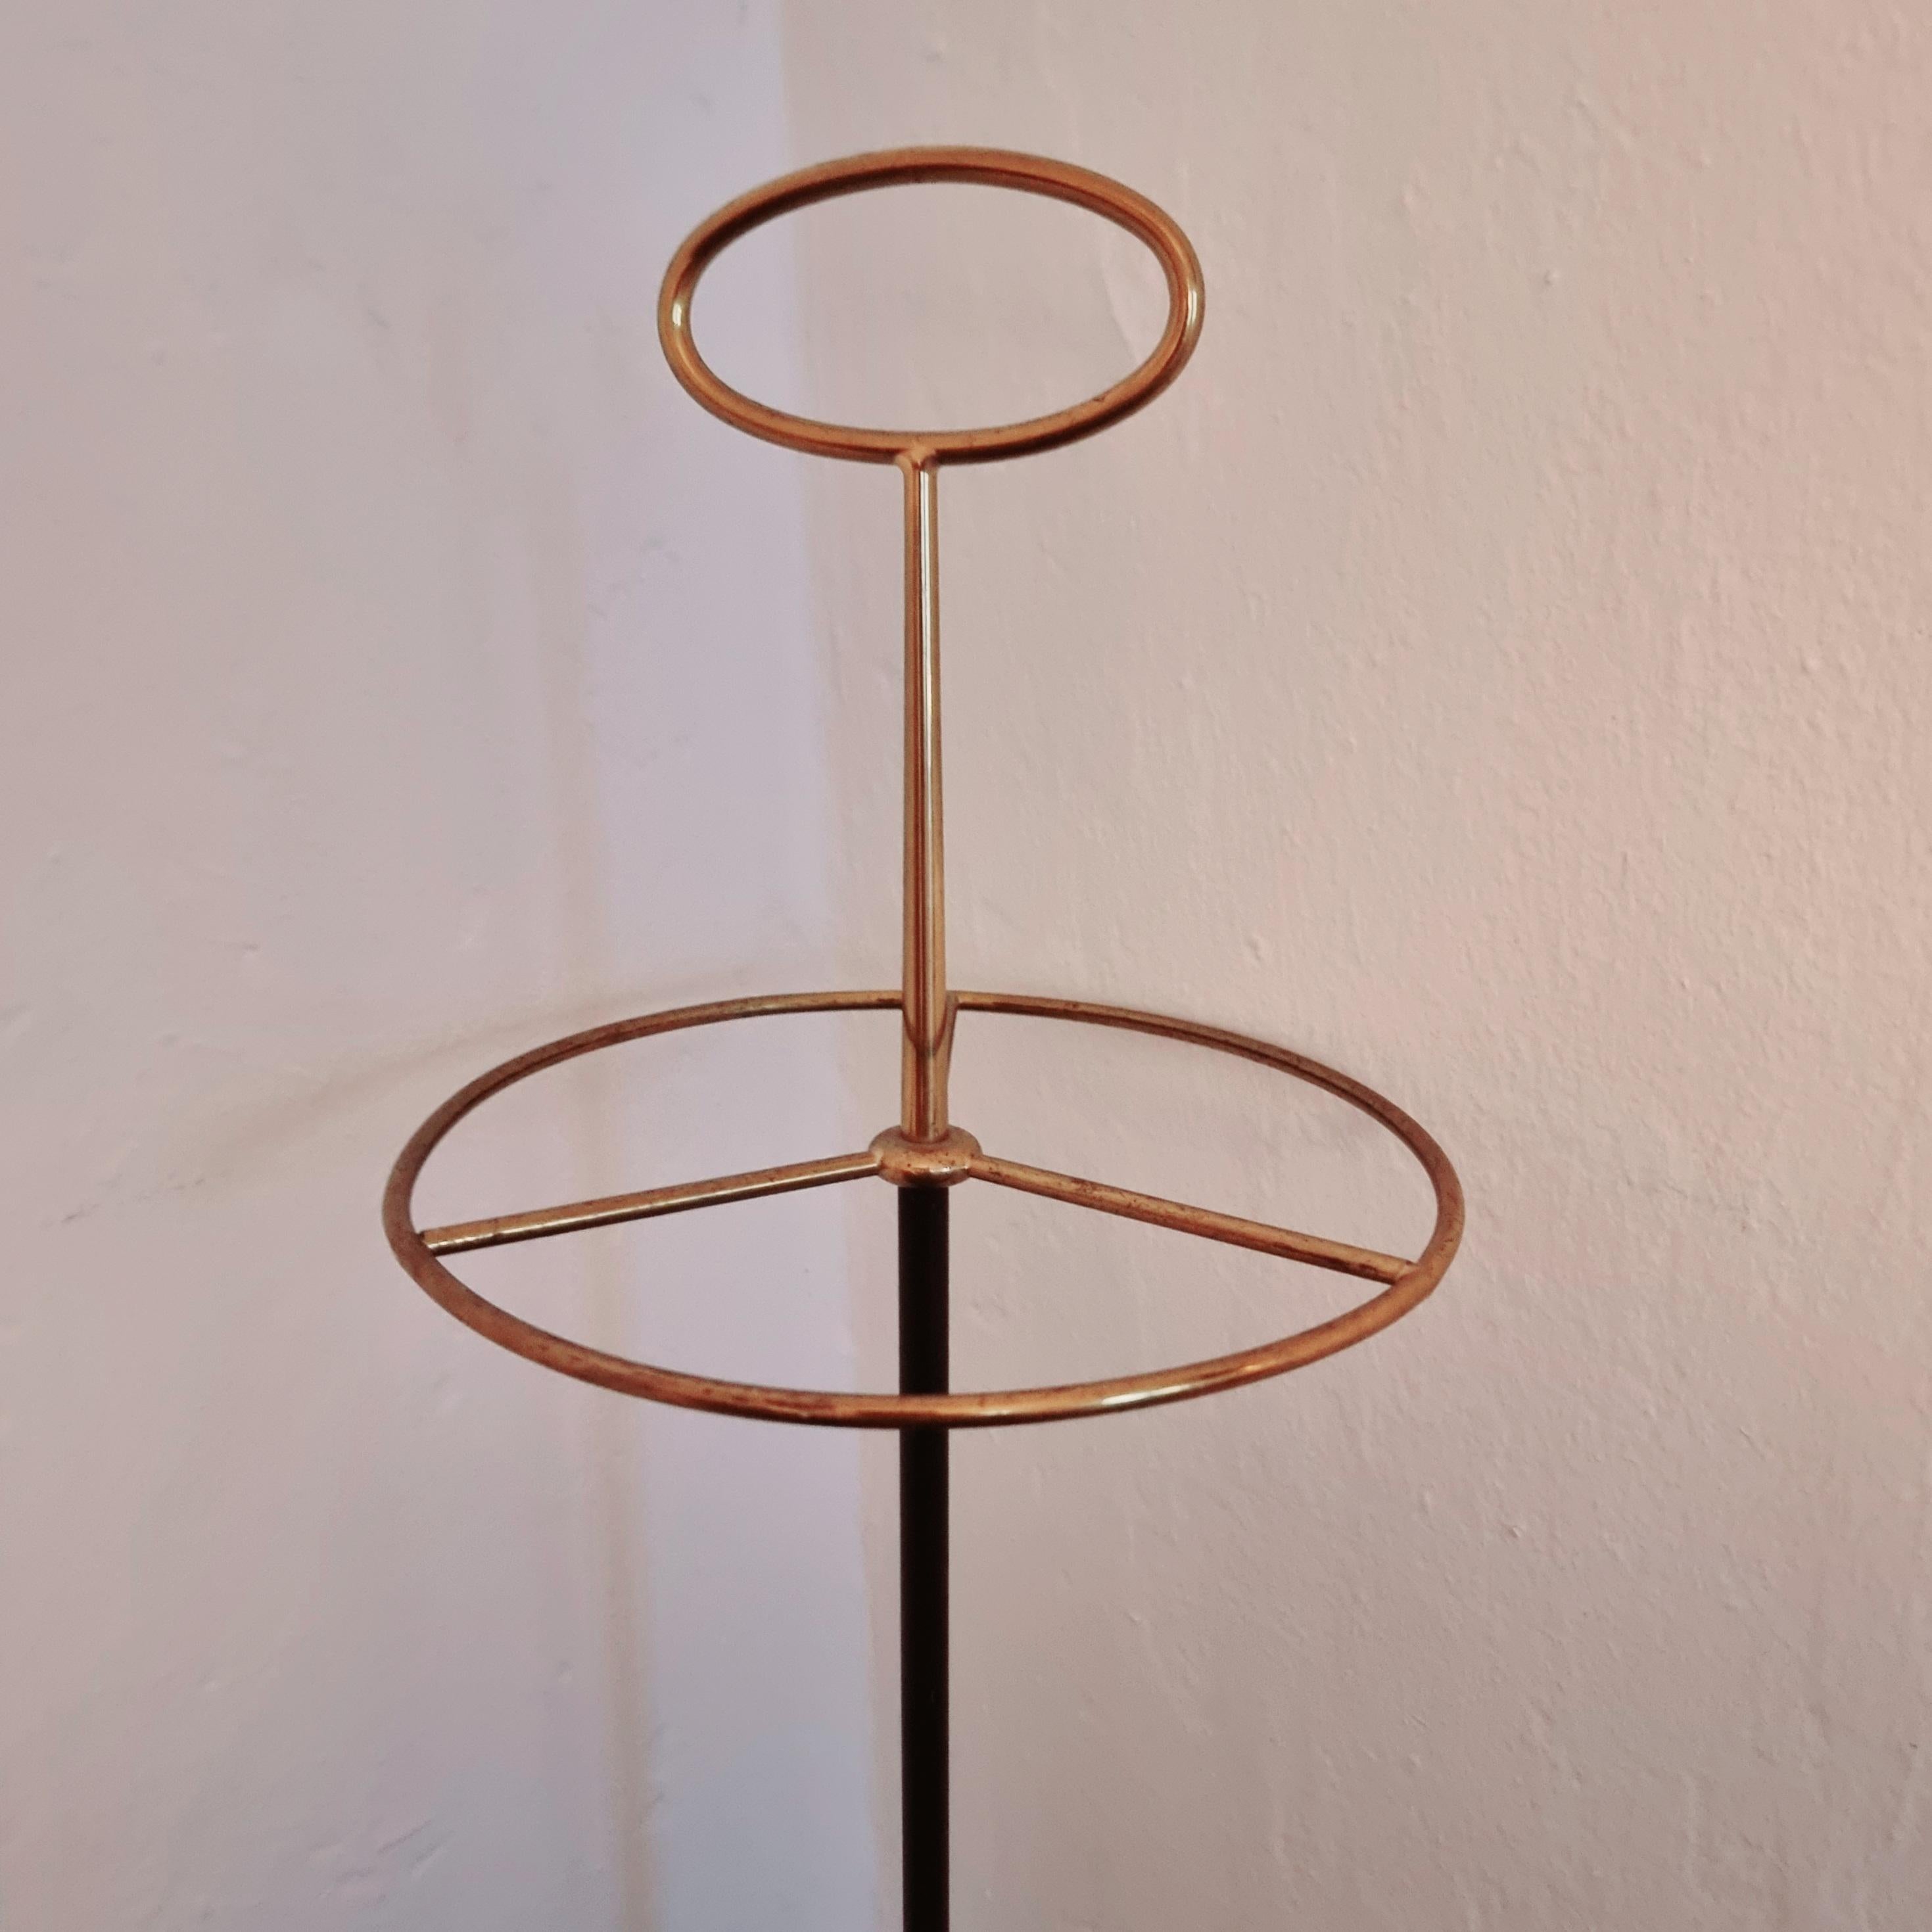 Gunnar Ander, umbrella stand, Scandinavian Modern / Midcentury Modern classic In Fair Condition For Sale In Stockholm, SE